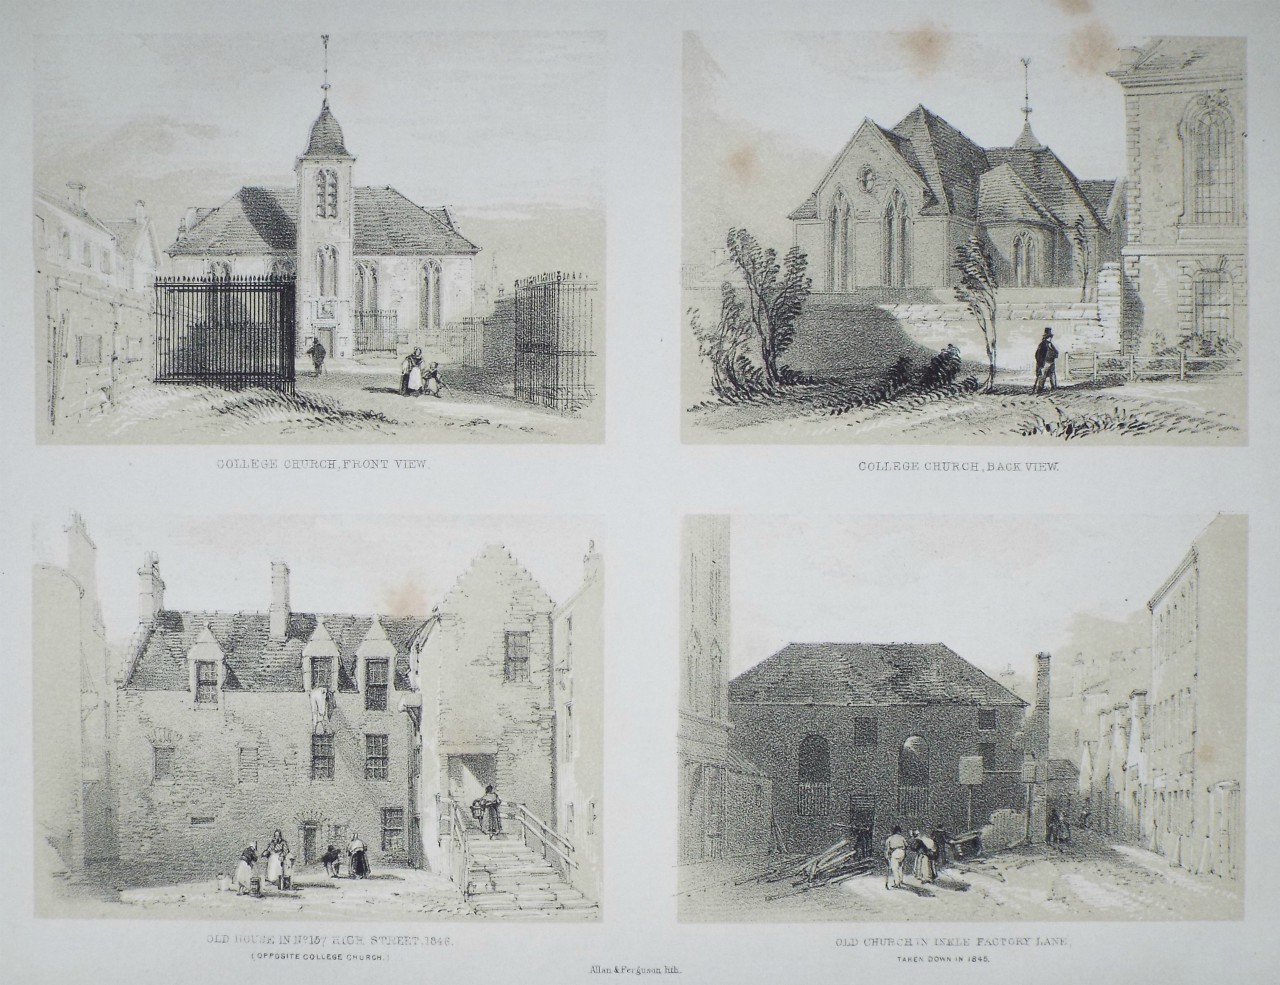 Lithograph - College Church Front View. College Church Back View. Old House in No. 157 High Street, 1848 (opposite College Church.) Old Church in Inkle Factory Lane, taken down in 1845. - Allan